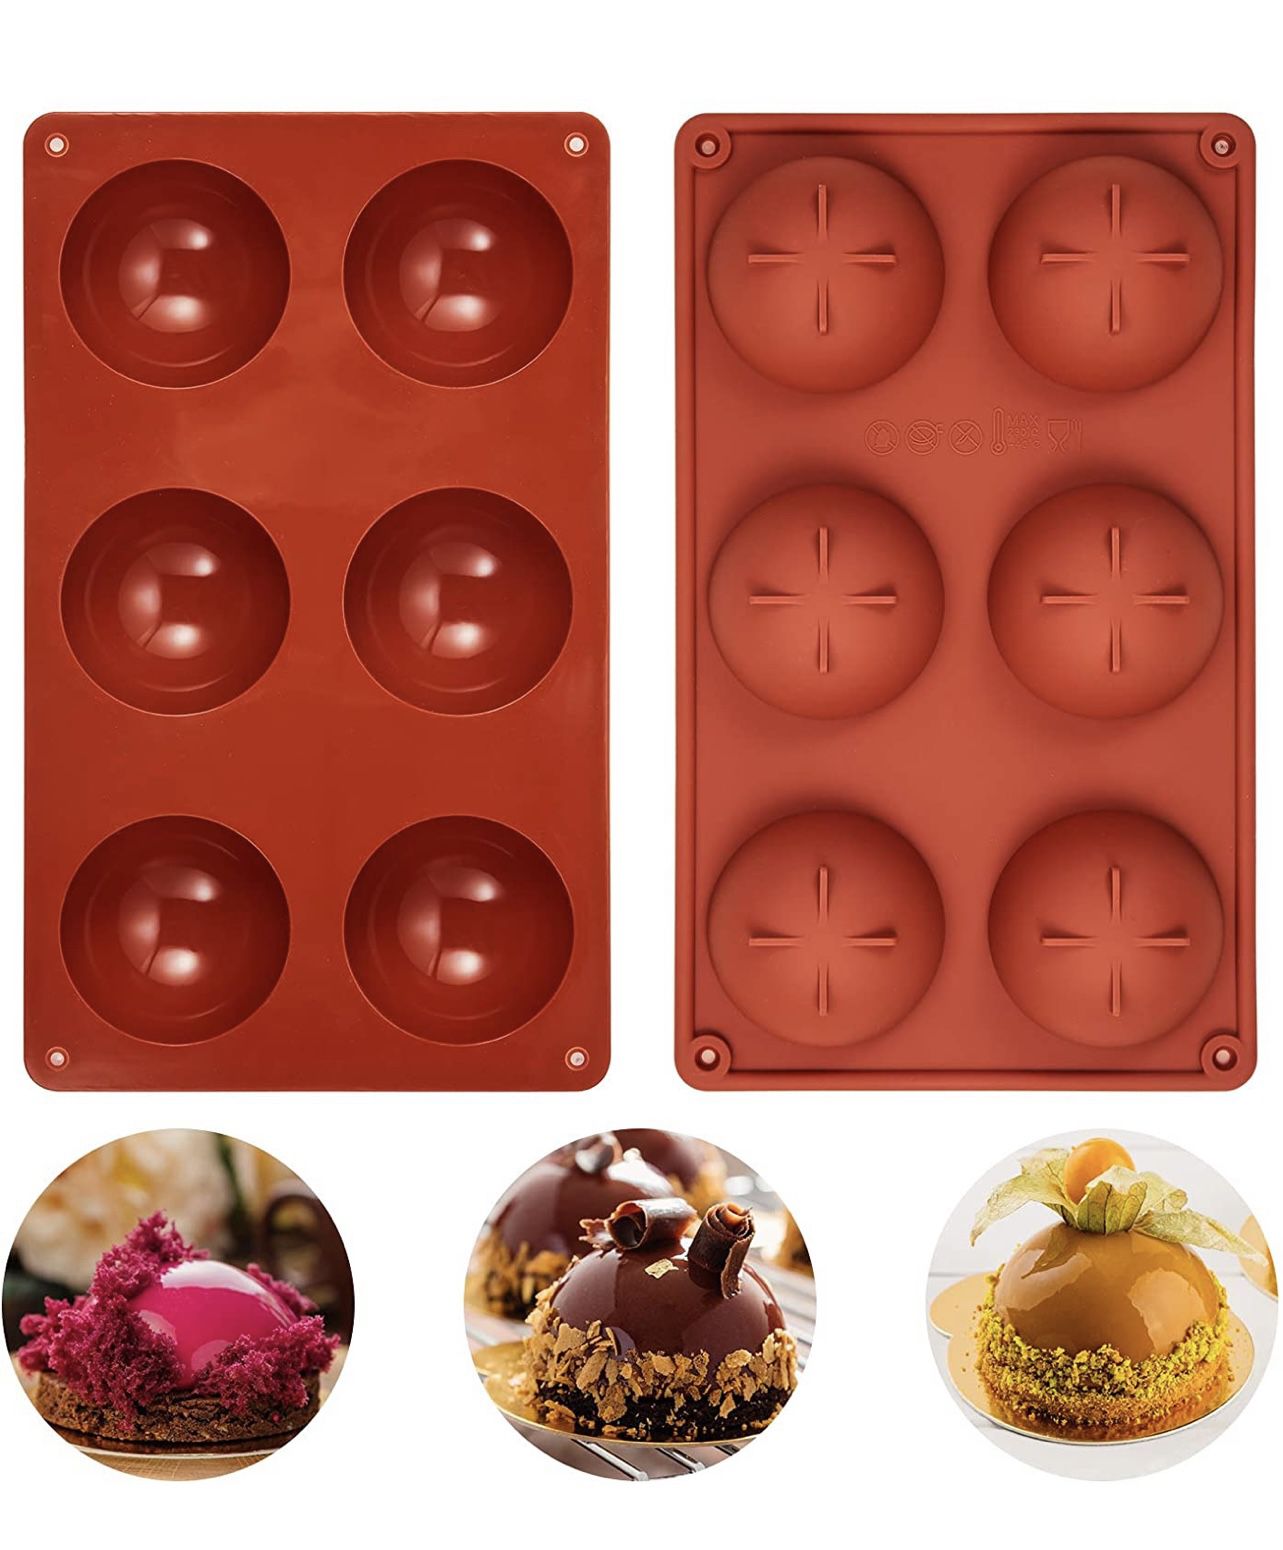 Silicone Molds with Special Bottom Design, 2.63"Sph Mold for Chocolate, Cake, Jelly, Pudding, Hand Soap, Chocolate Bomb Mold - 3pack Brown